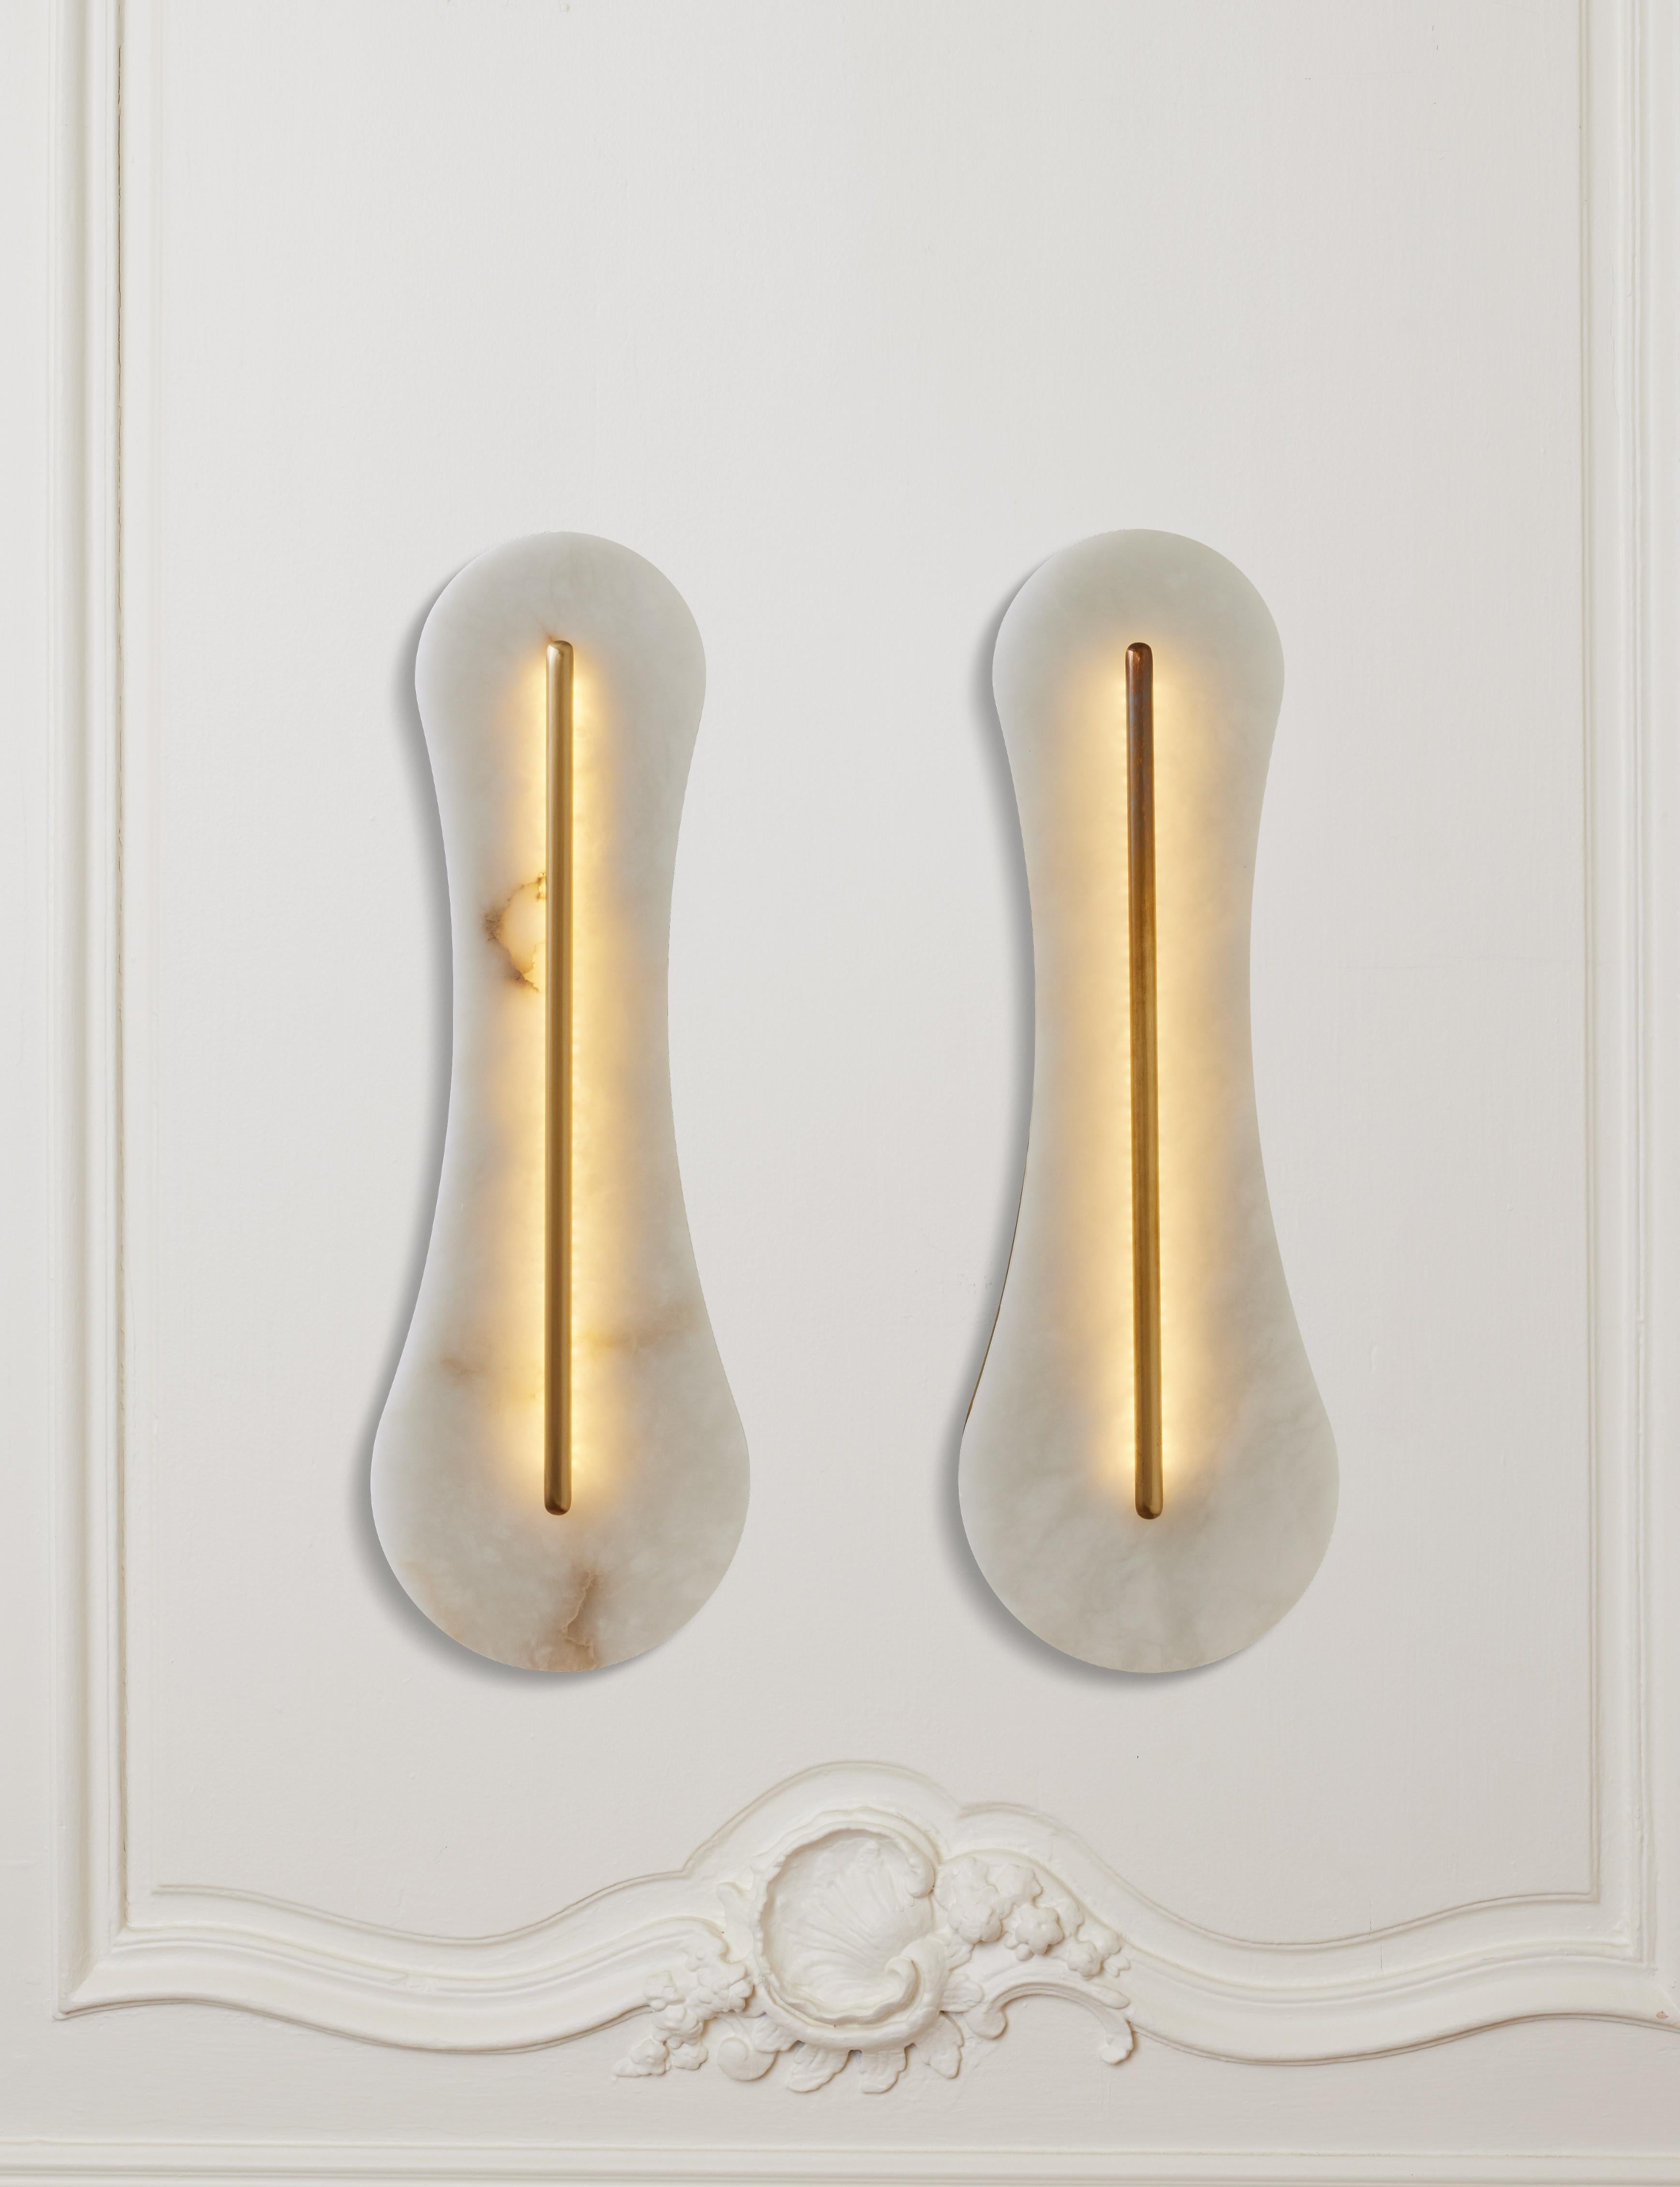 Pair of sconces in brass and sculpted alabaster.
Creation by Studio Glustin.

